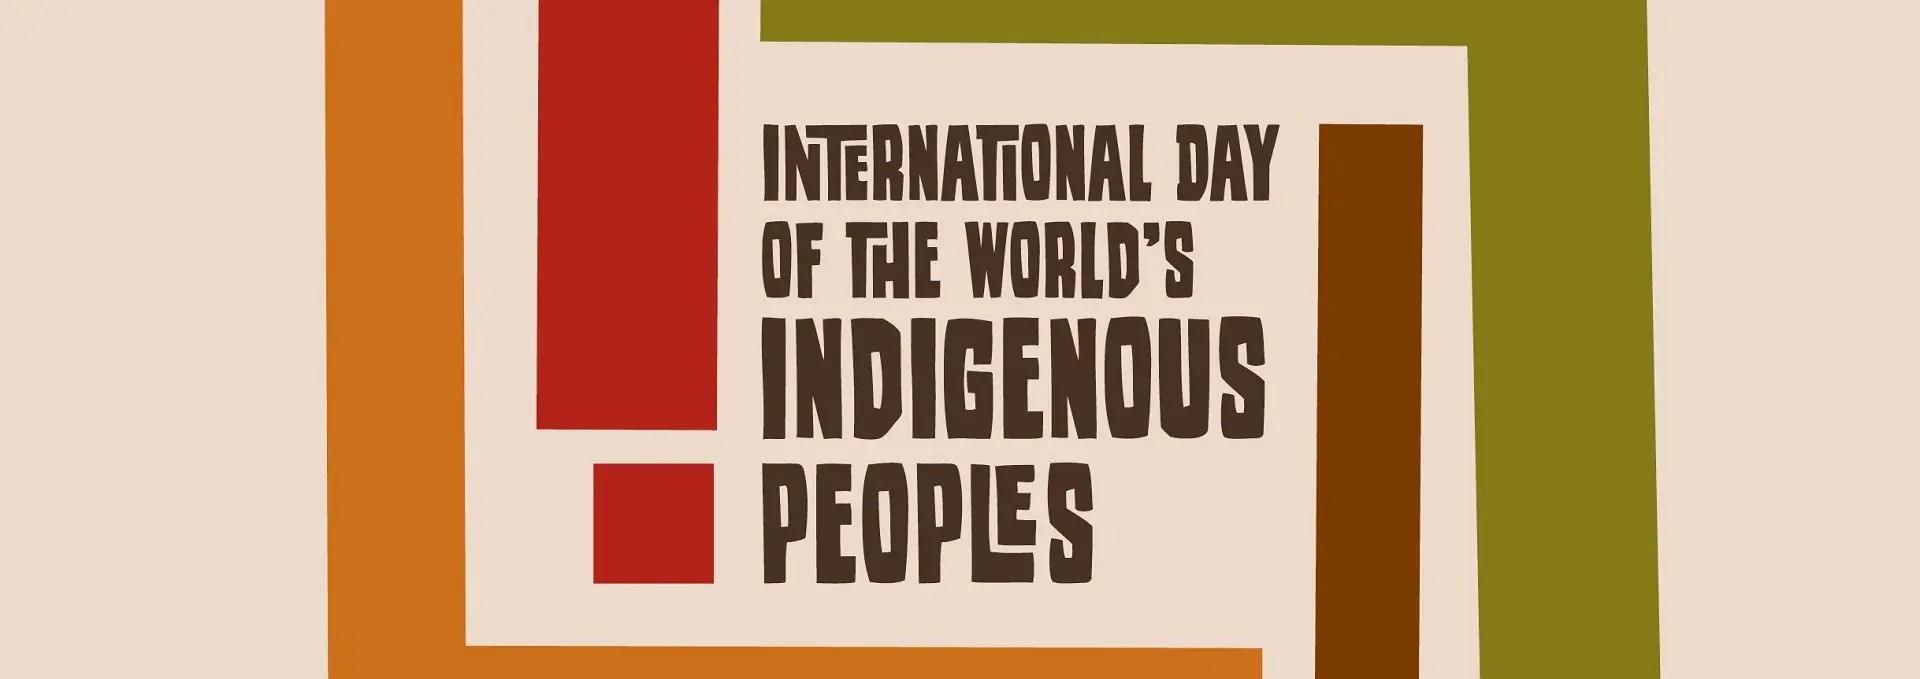 international day of the world's indigenous peoples